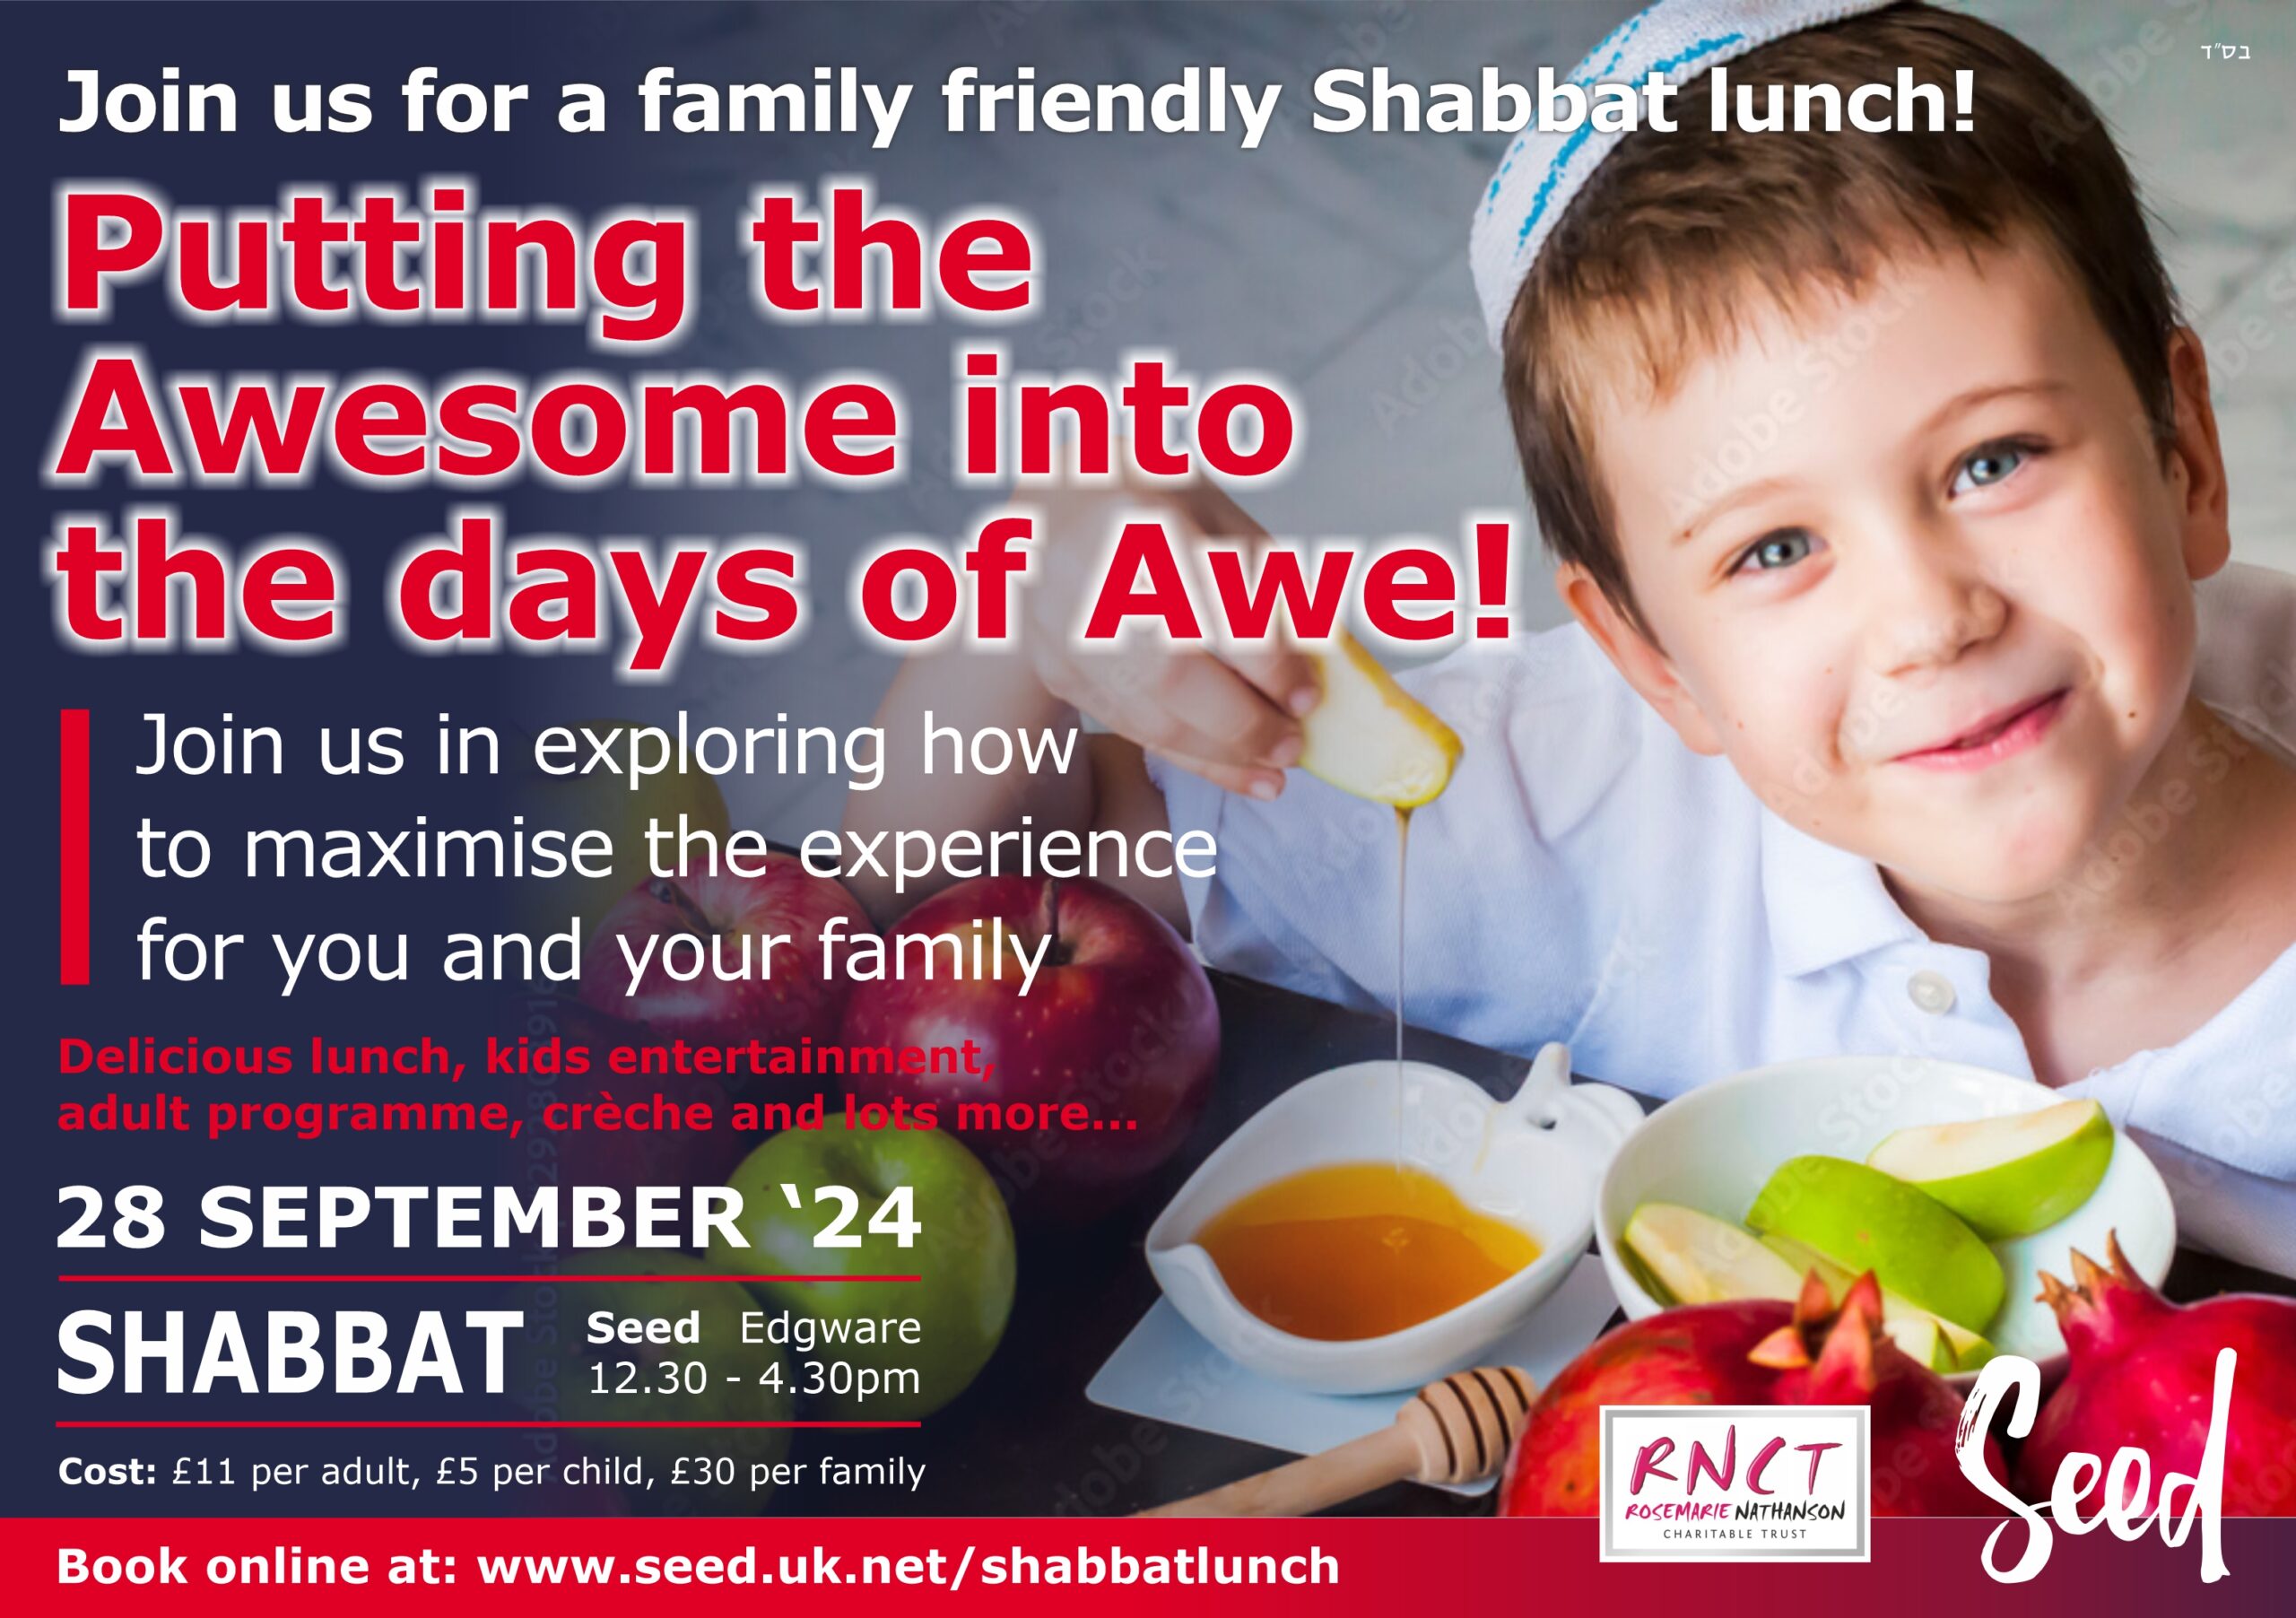 You are currently viewing Putting the Awesome into the days of Awe! Family friendly Shabbat Lunch